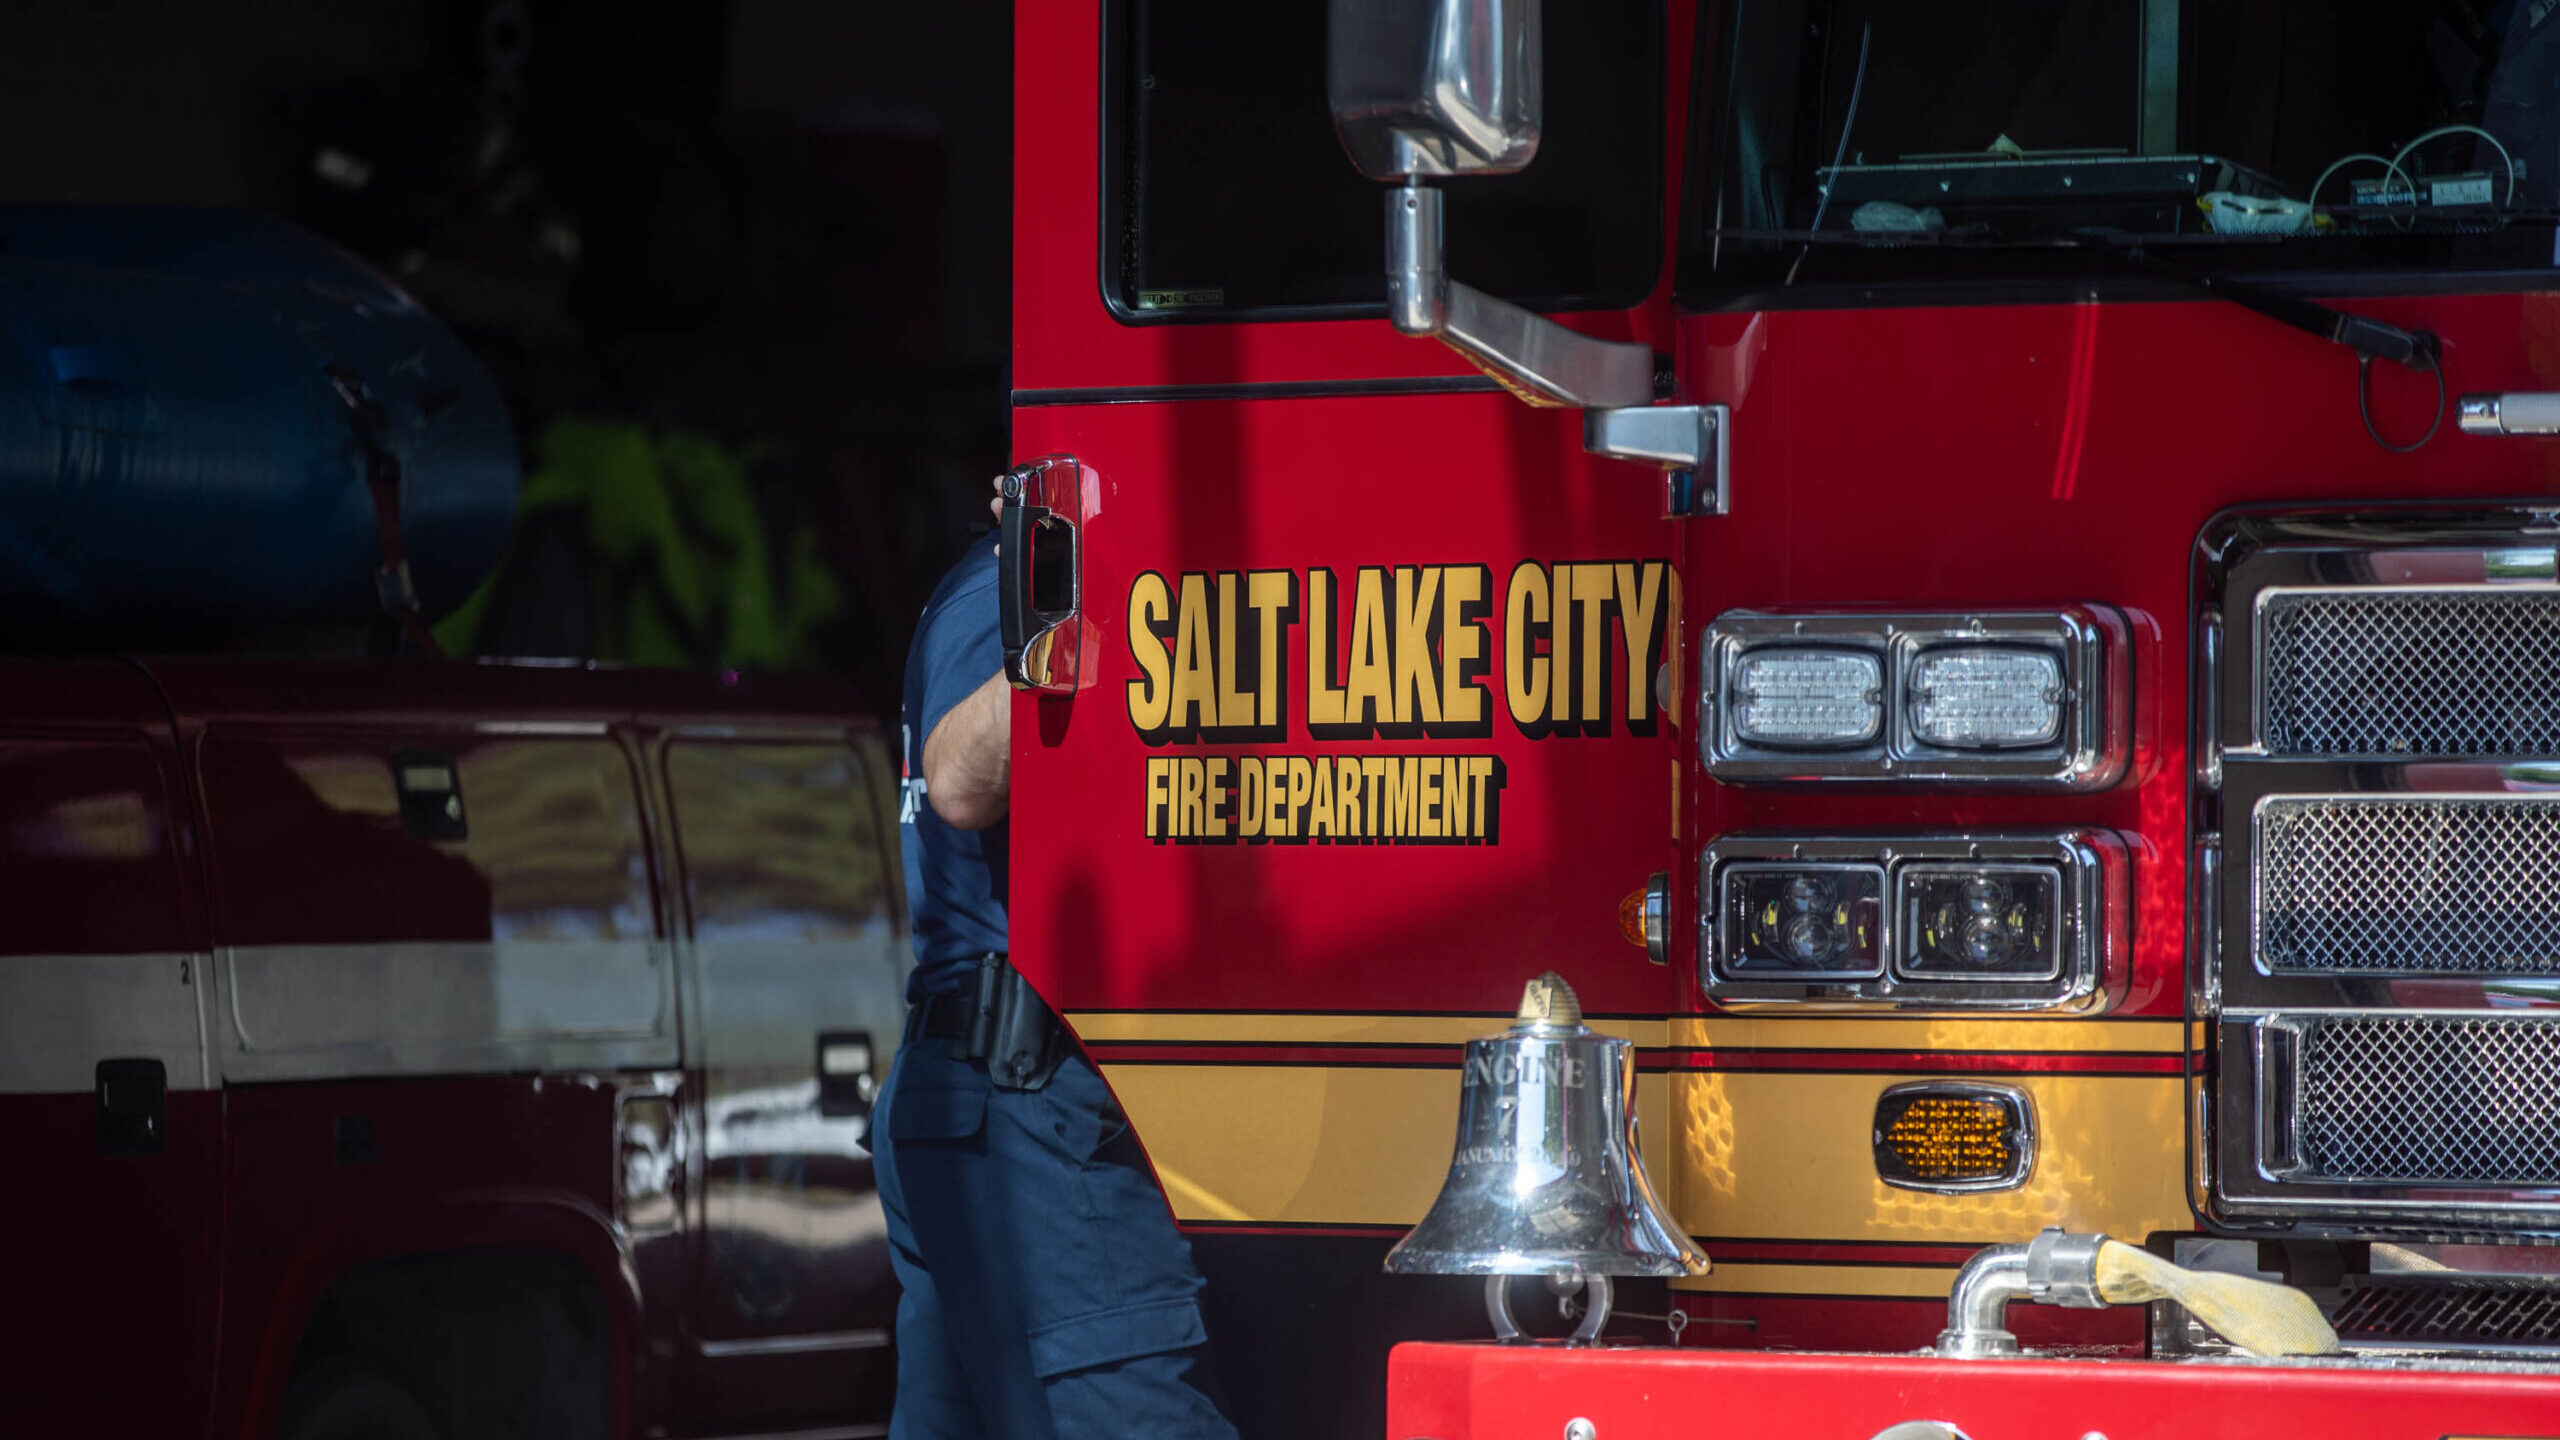 Firefighters at Station No. 7 in Salt Lake City. Salt Lake City Fire Department respond to what rep...